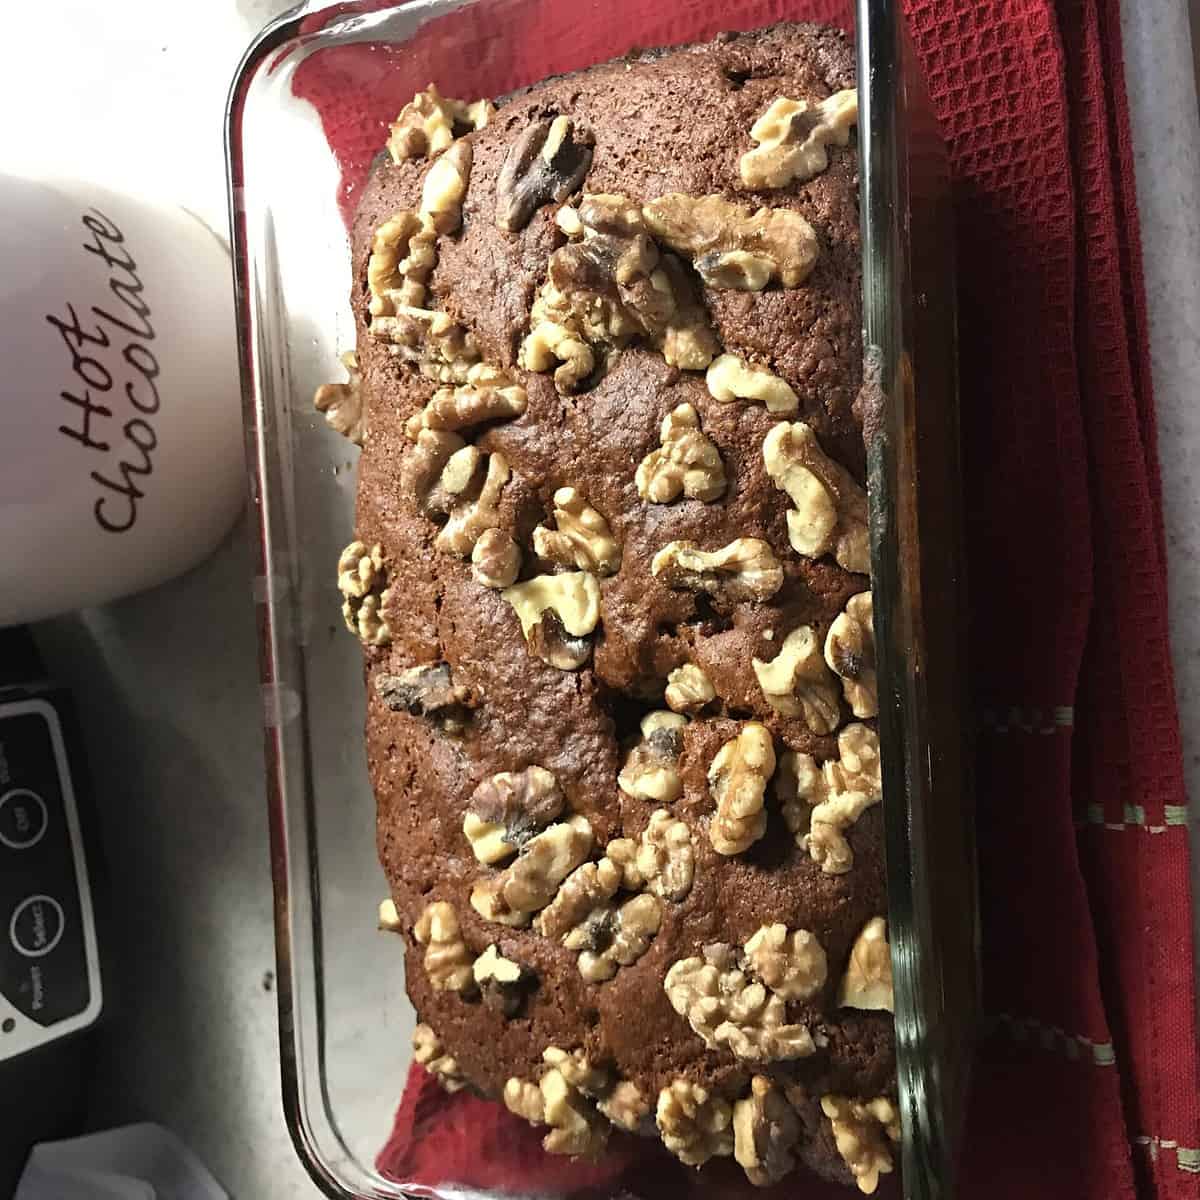  Satisfy your sweet tooth the healthy way with this Vegan Spelt Banana Bread!